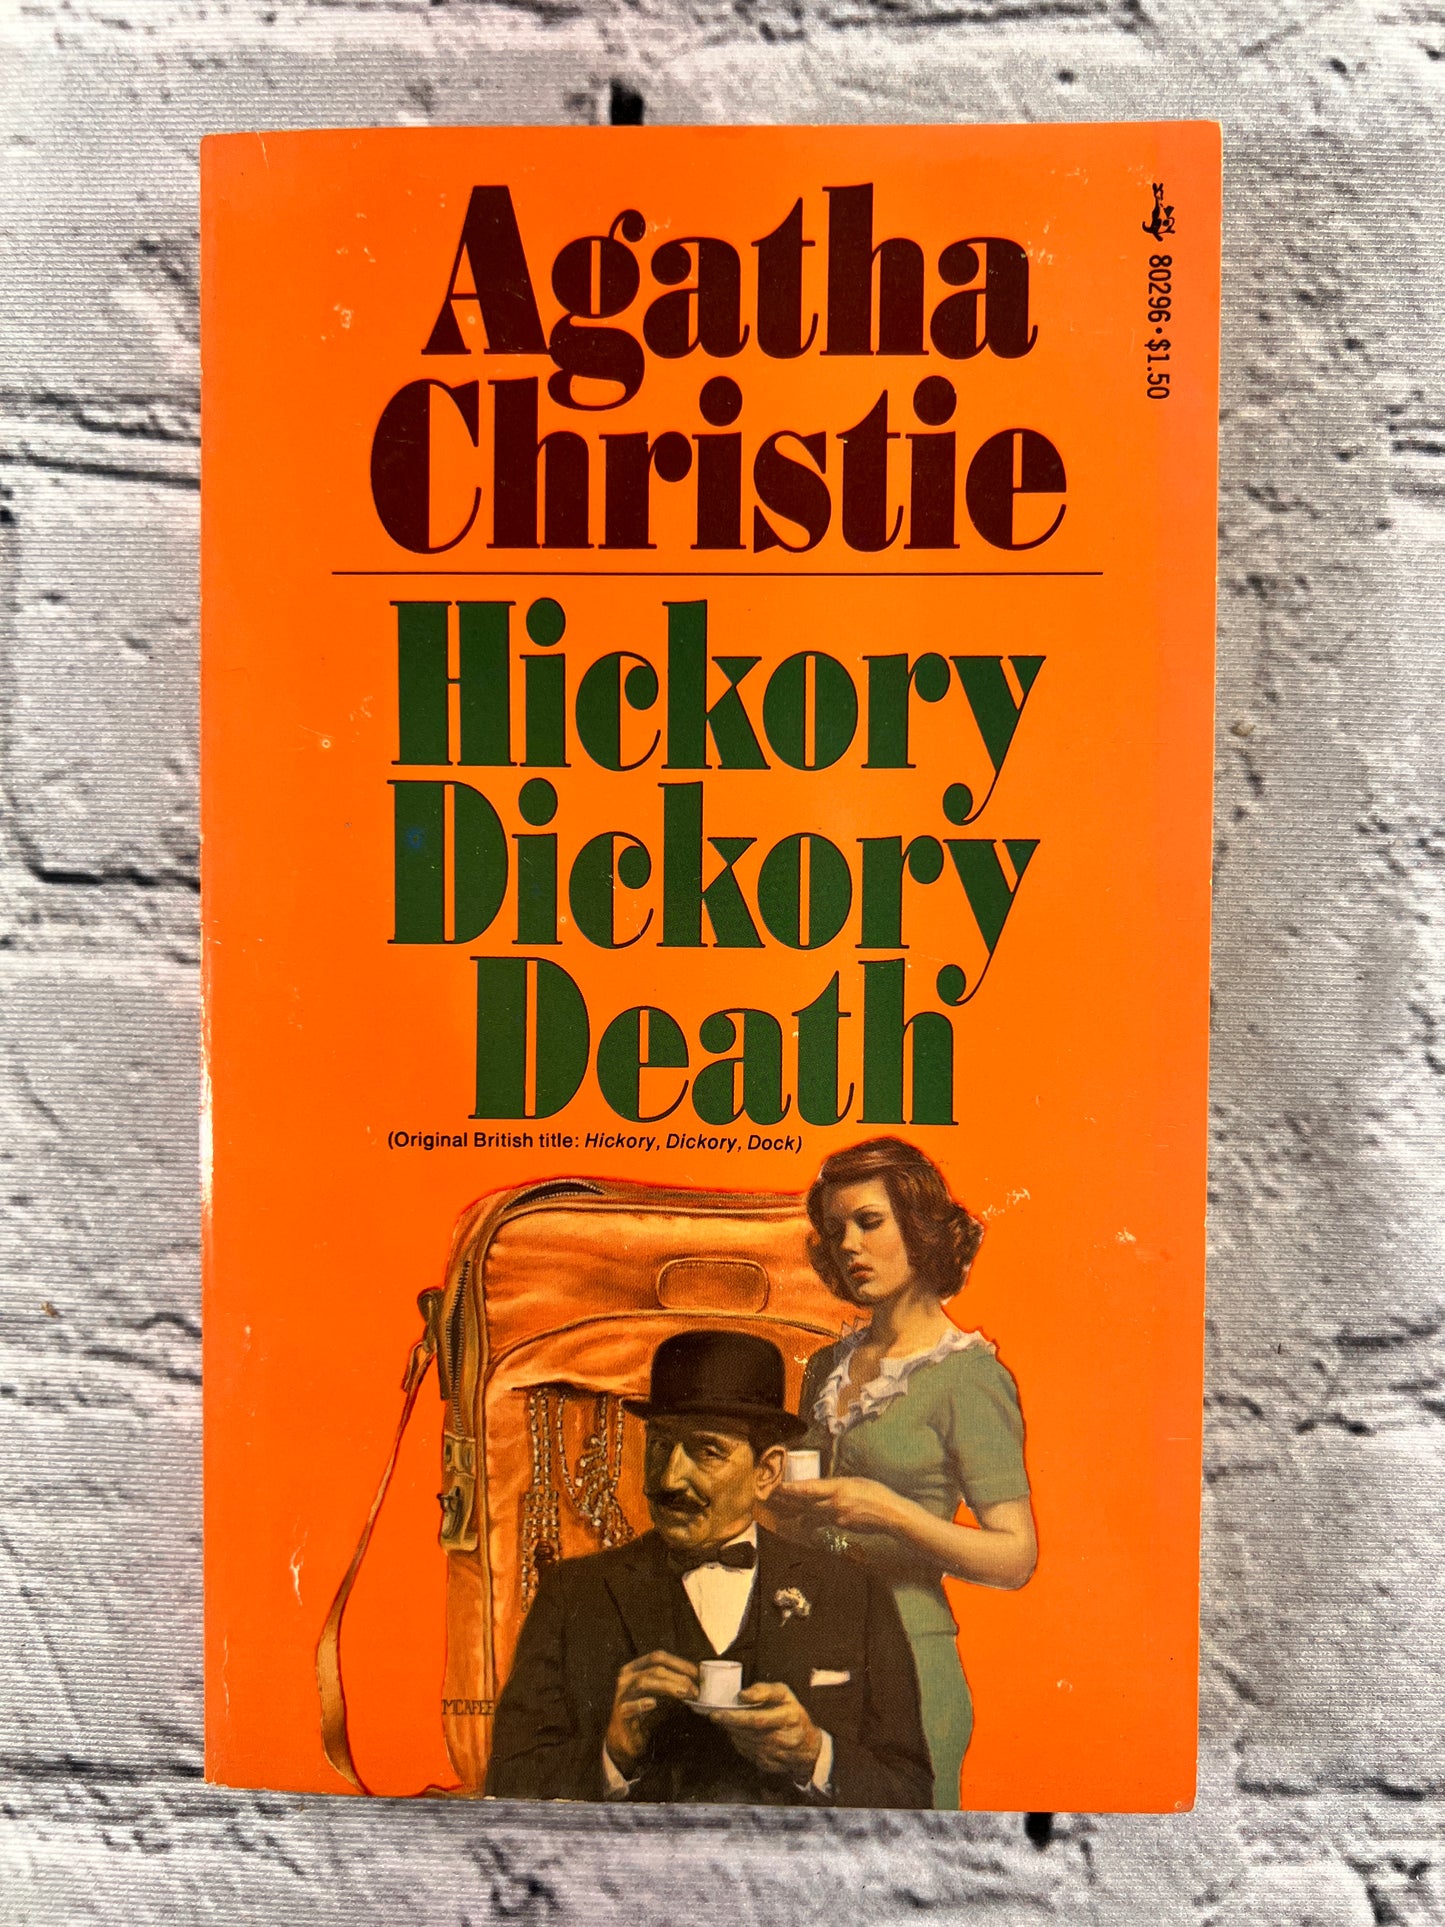 Hickory Dickory Death by Agatha Christie [1975 · Pocket Books · 6th Print]